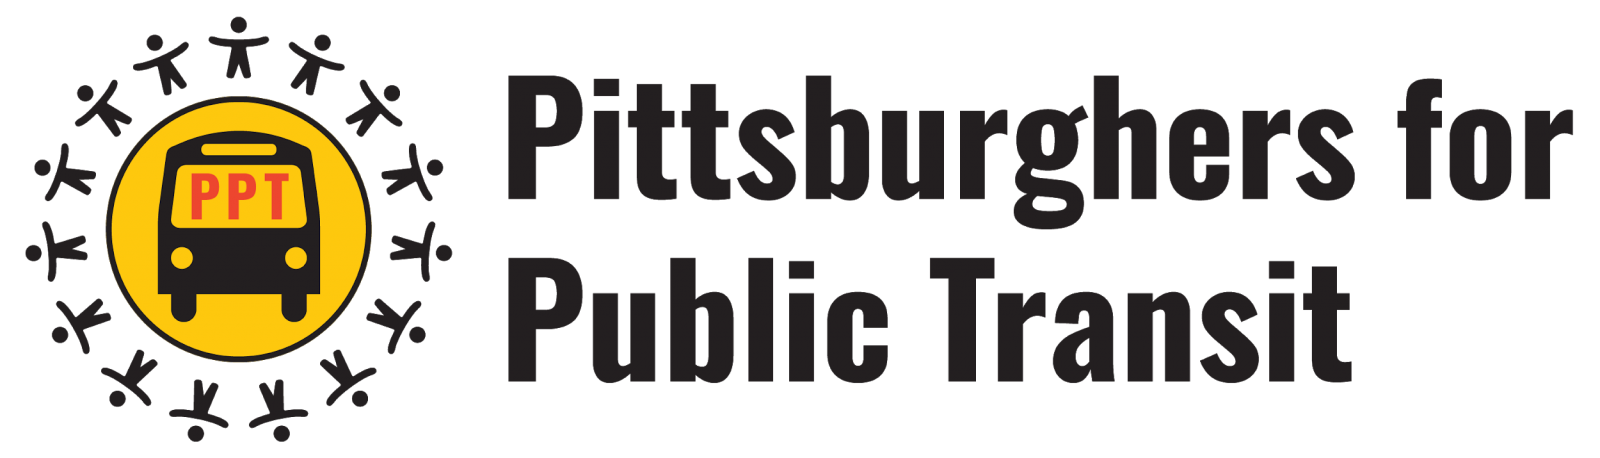 PPT - Pittsburghers for Public Transit